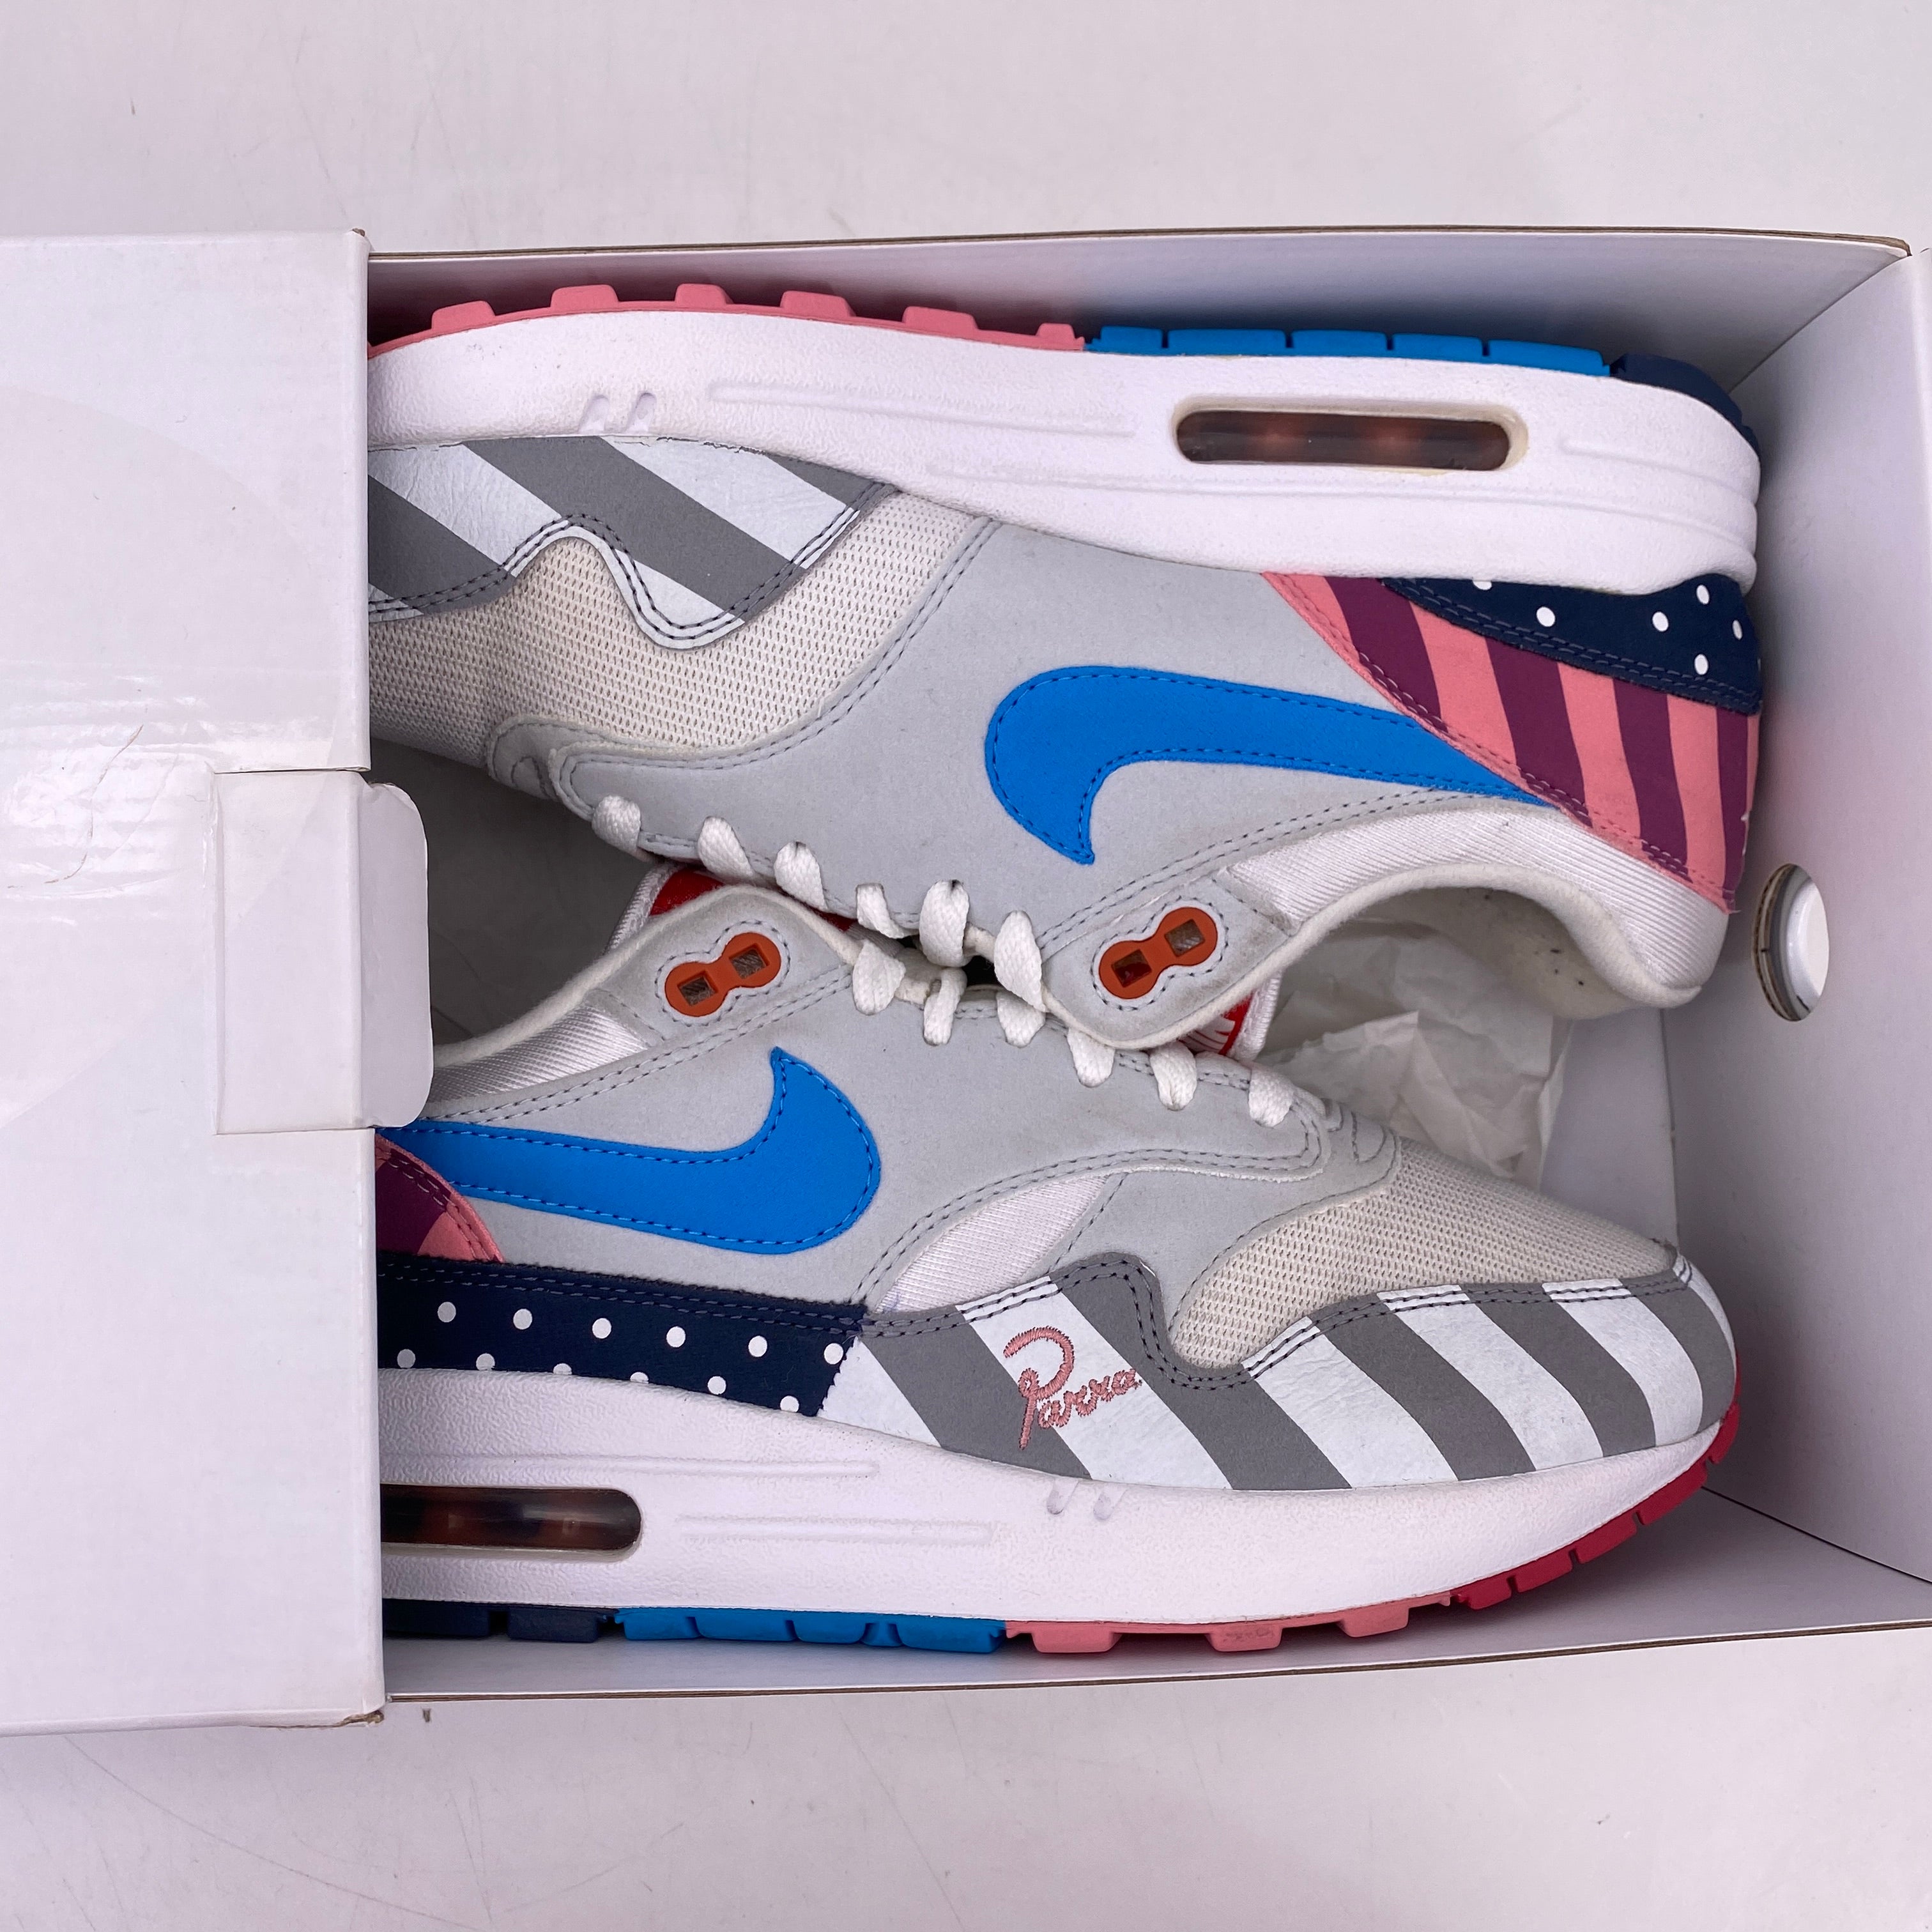 Nike Air Max 1 &quot;Parra&quot; 2018 Used Size 8